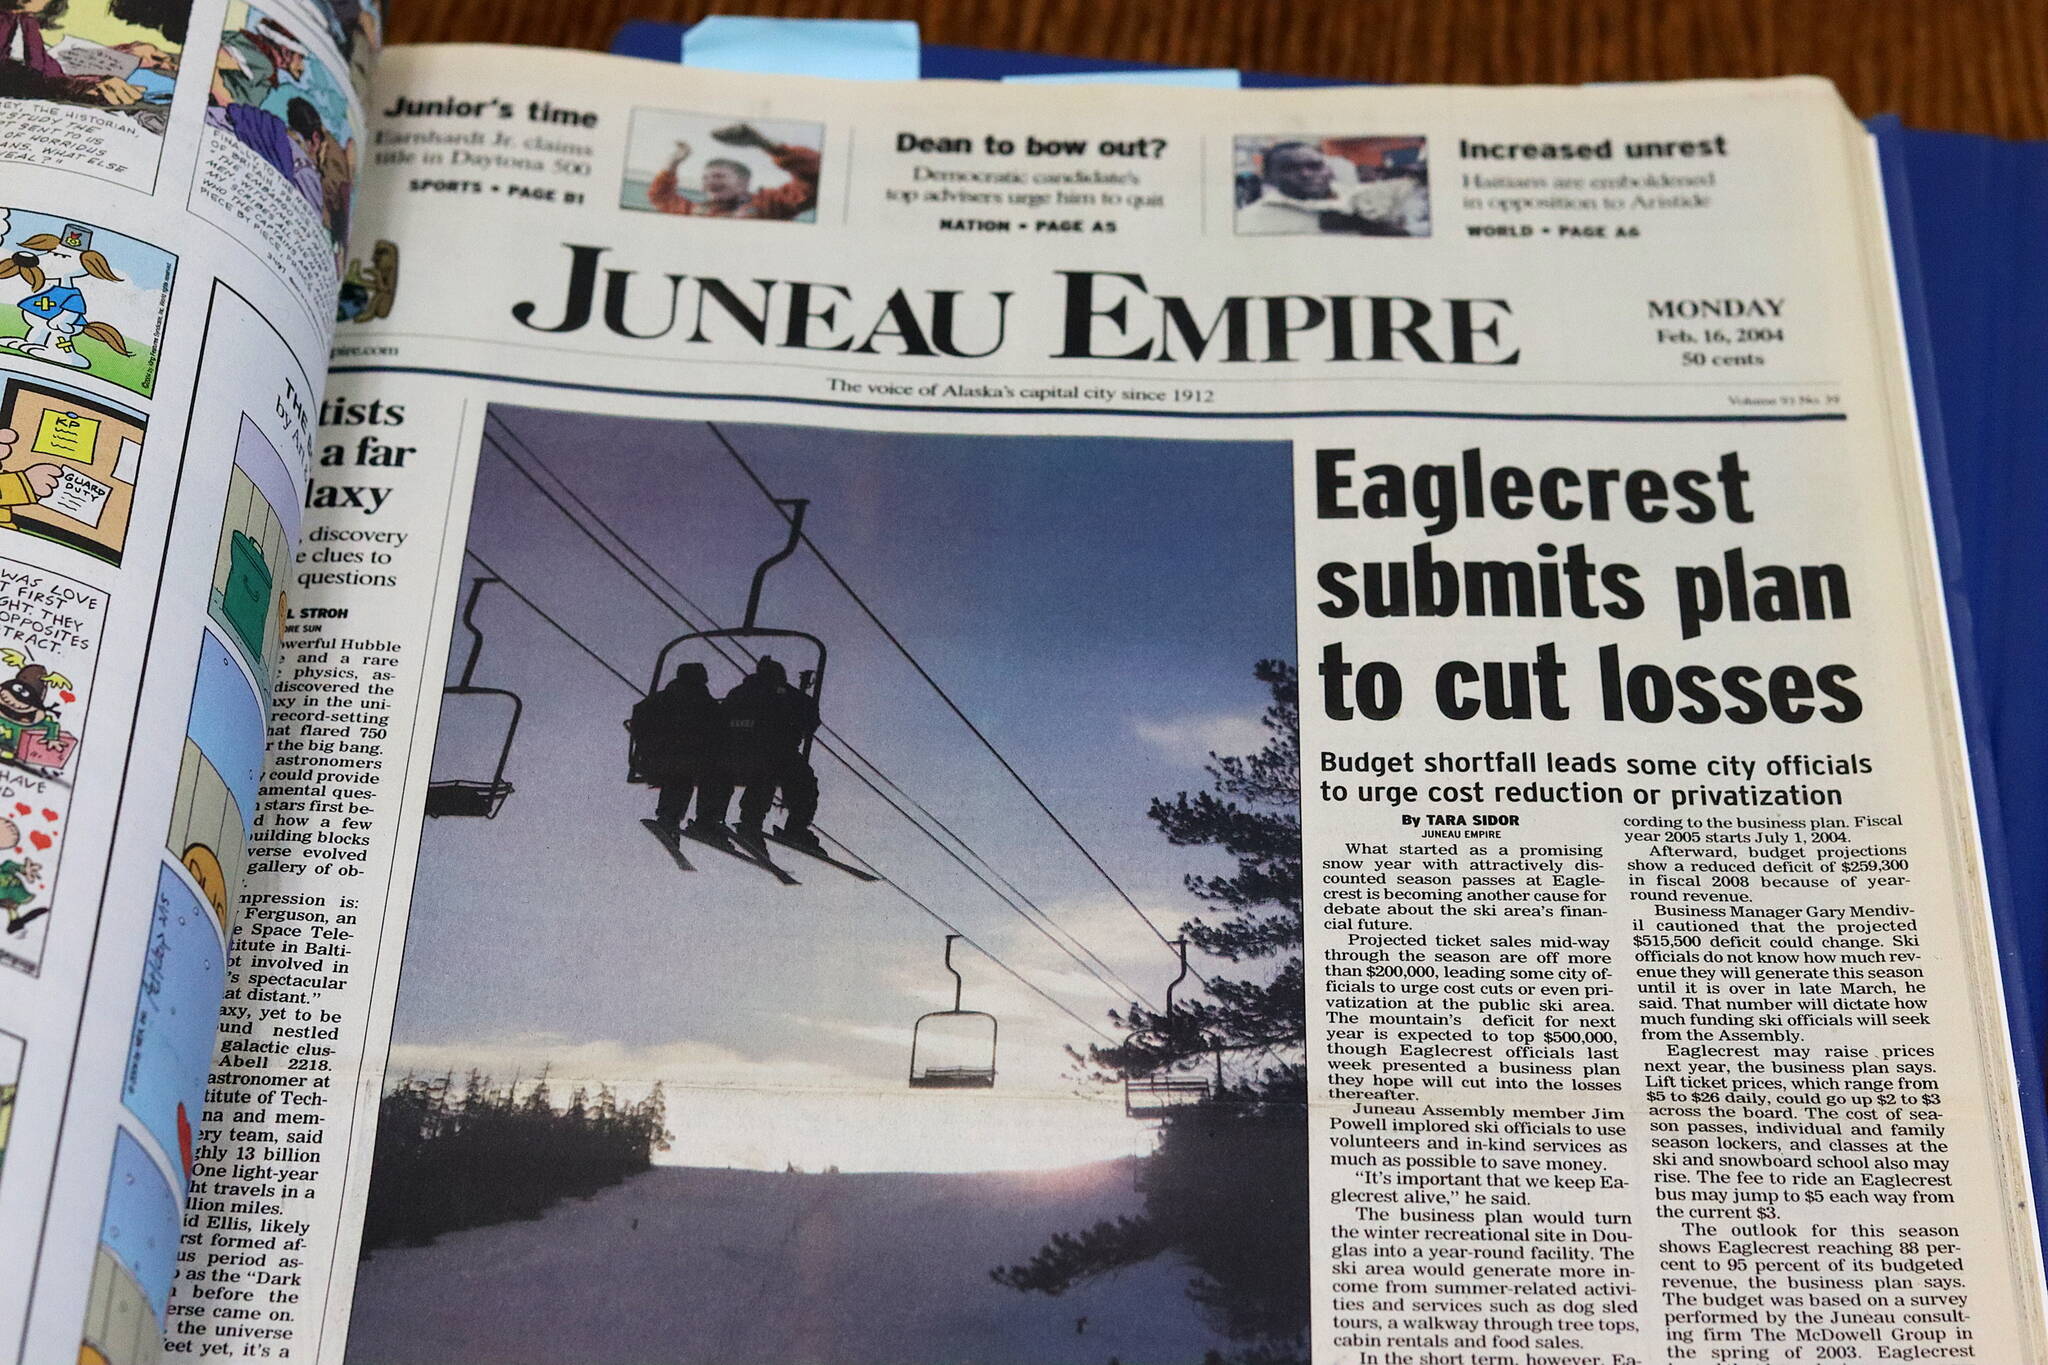 The front page of the Juneau Empire on Feb. 16, 2004. (Mark Sabbatini / Juneau Empire)